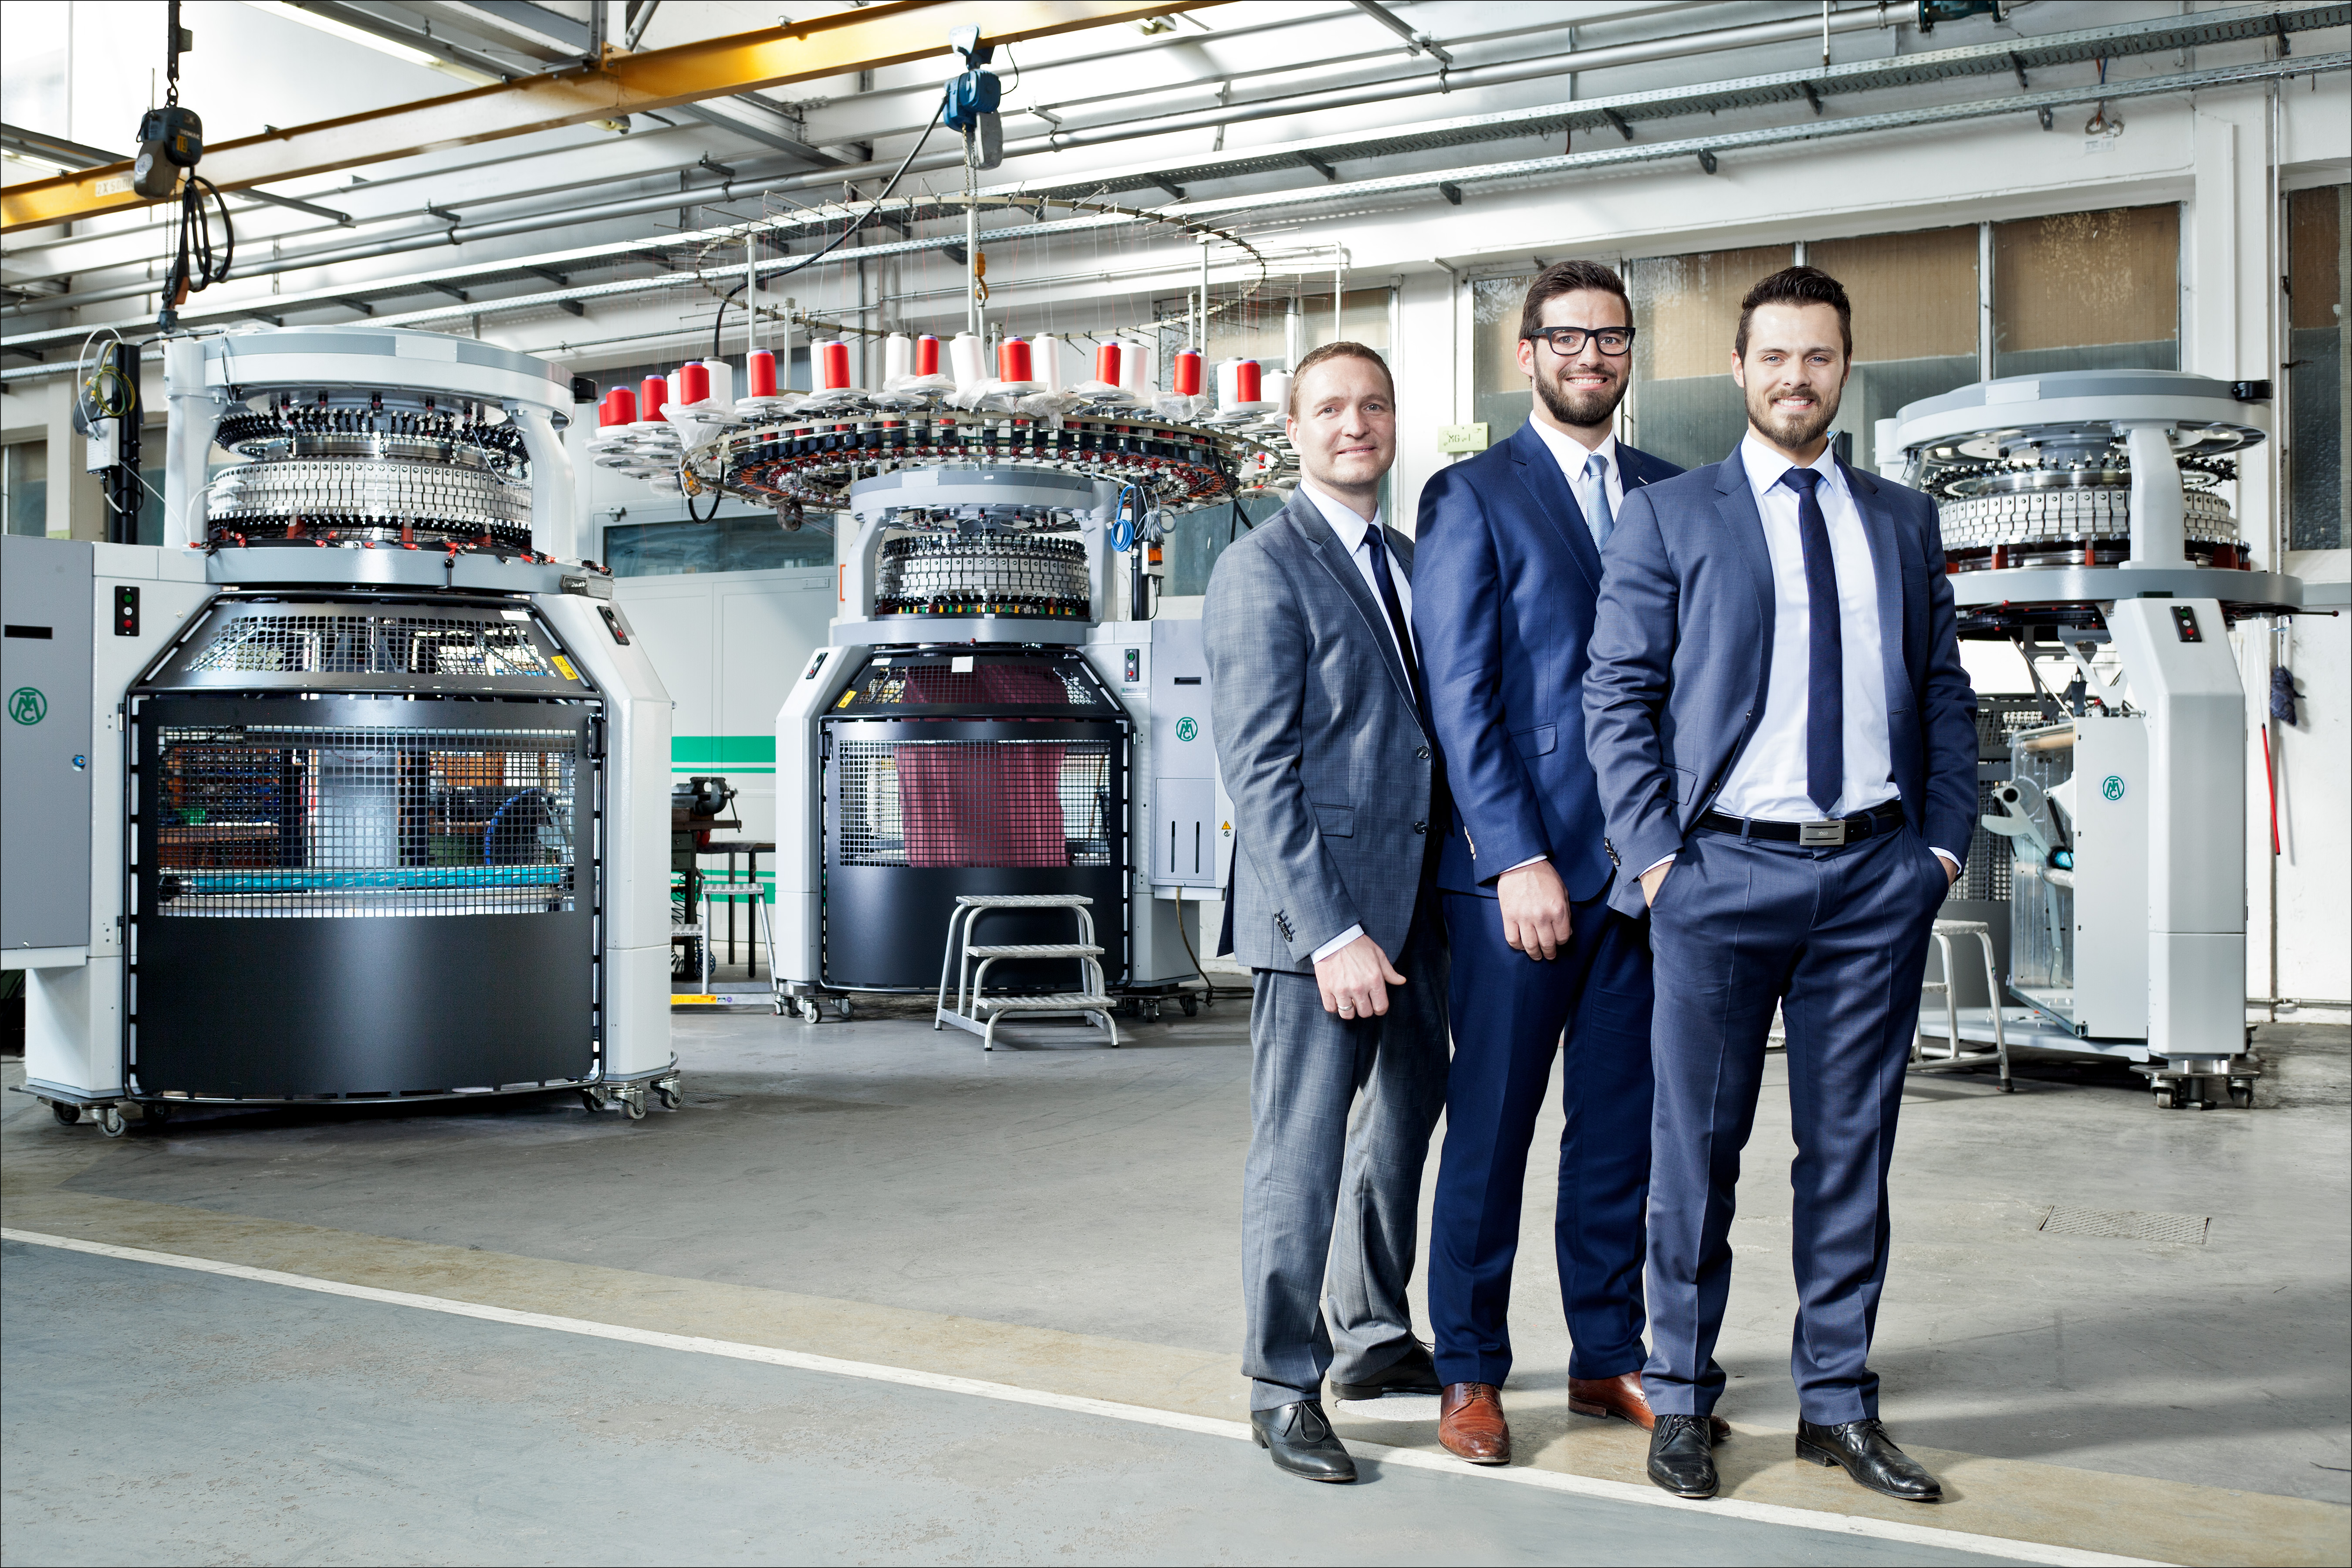 A young management team at the helm of a long-established company: managing directors Benjamin Mayer (right) and Marcus Mayer (left) are the fourth generation of the owner family to run the company. They are assisted by Sebastian Mayer (centre). Photo: www.hepp-fotografie.de